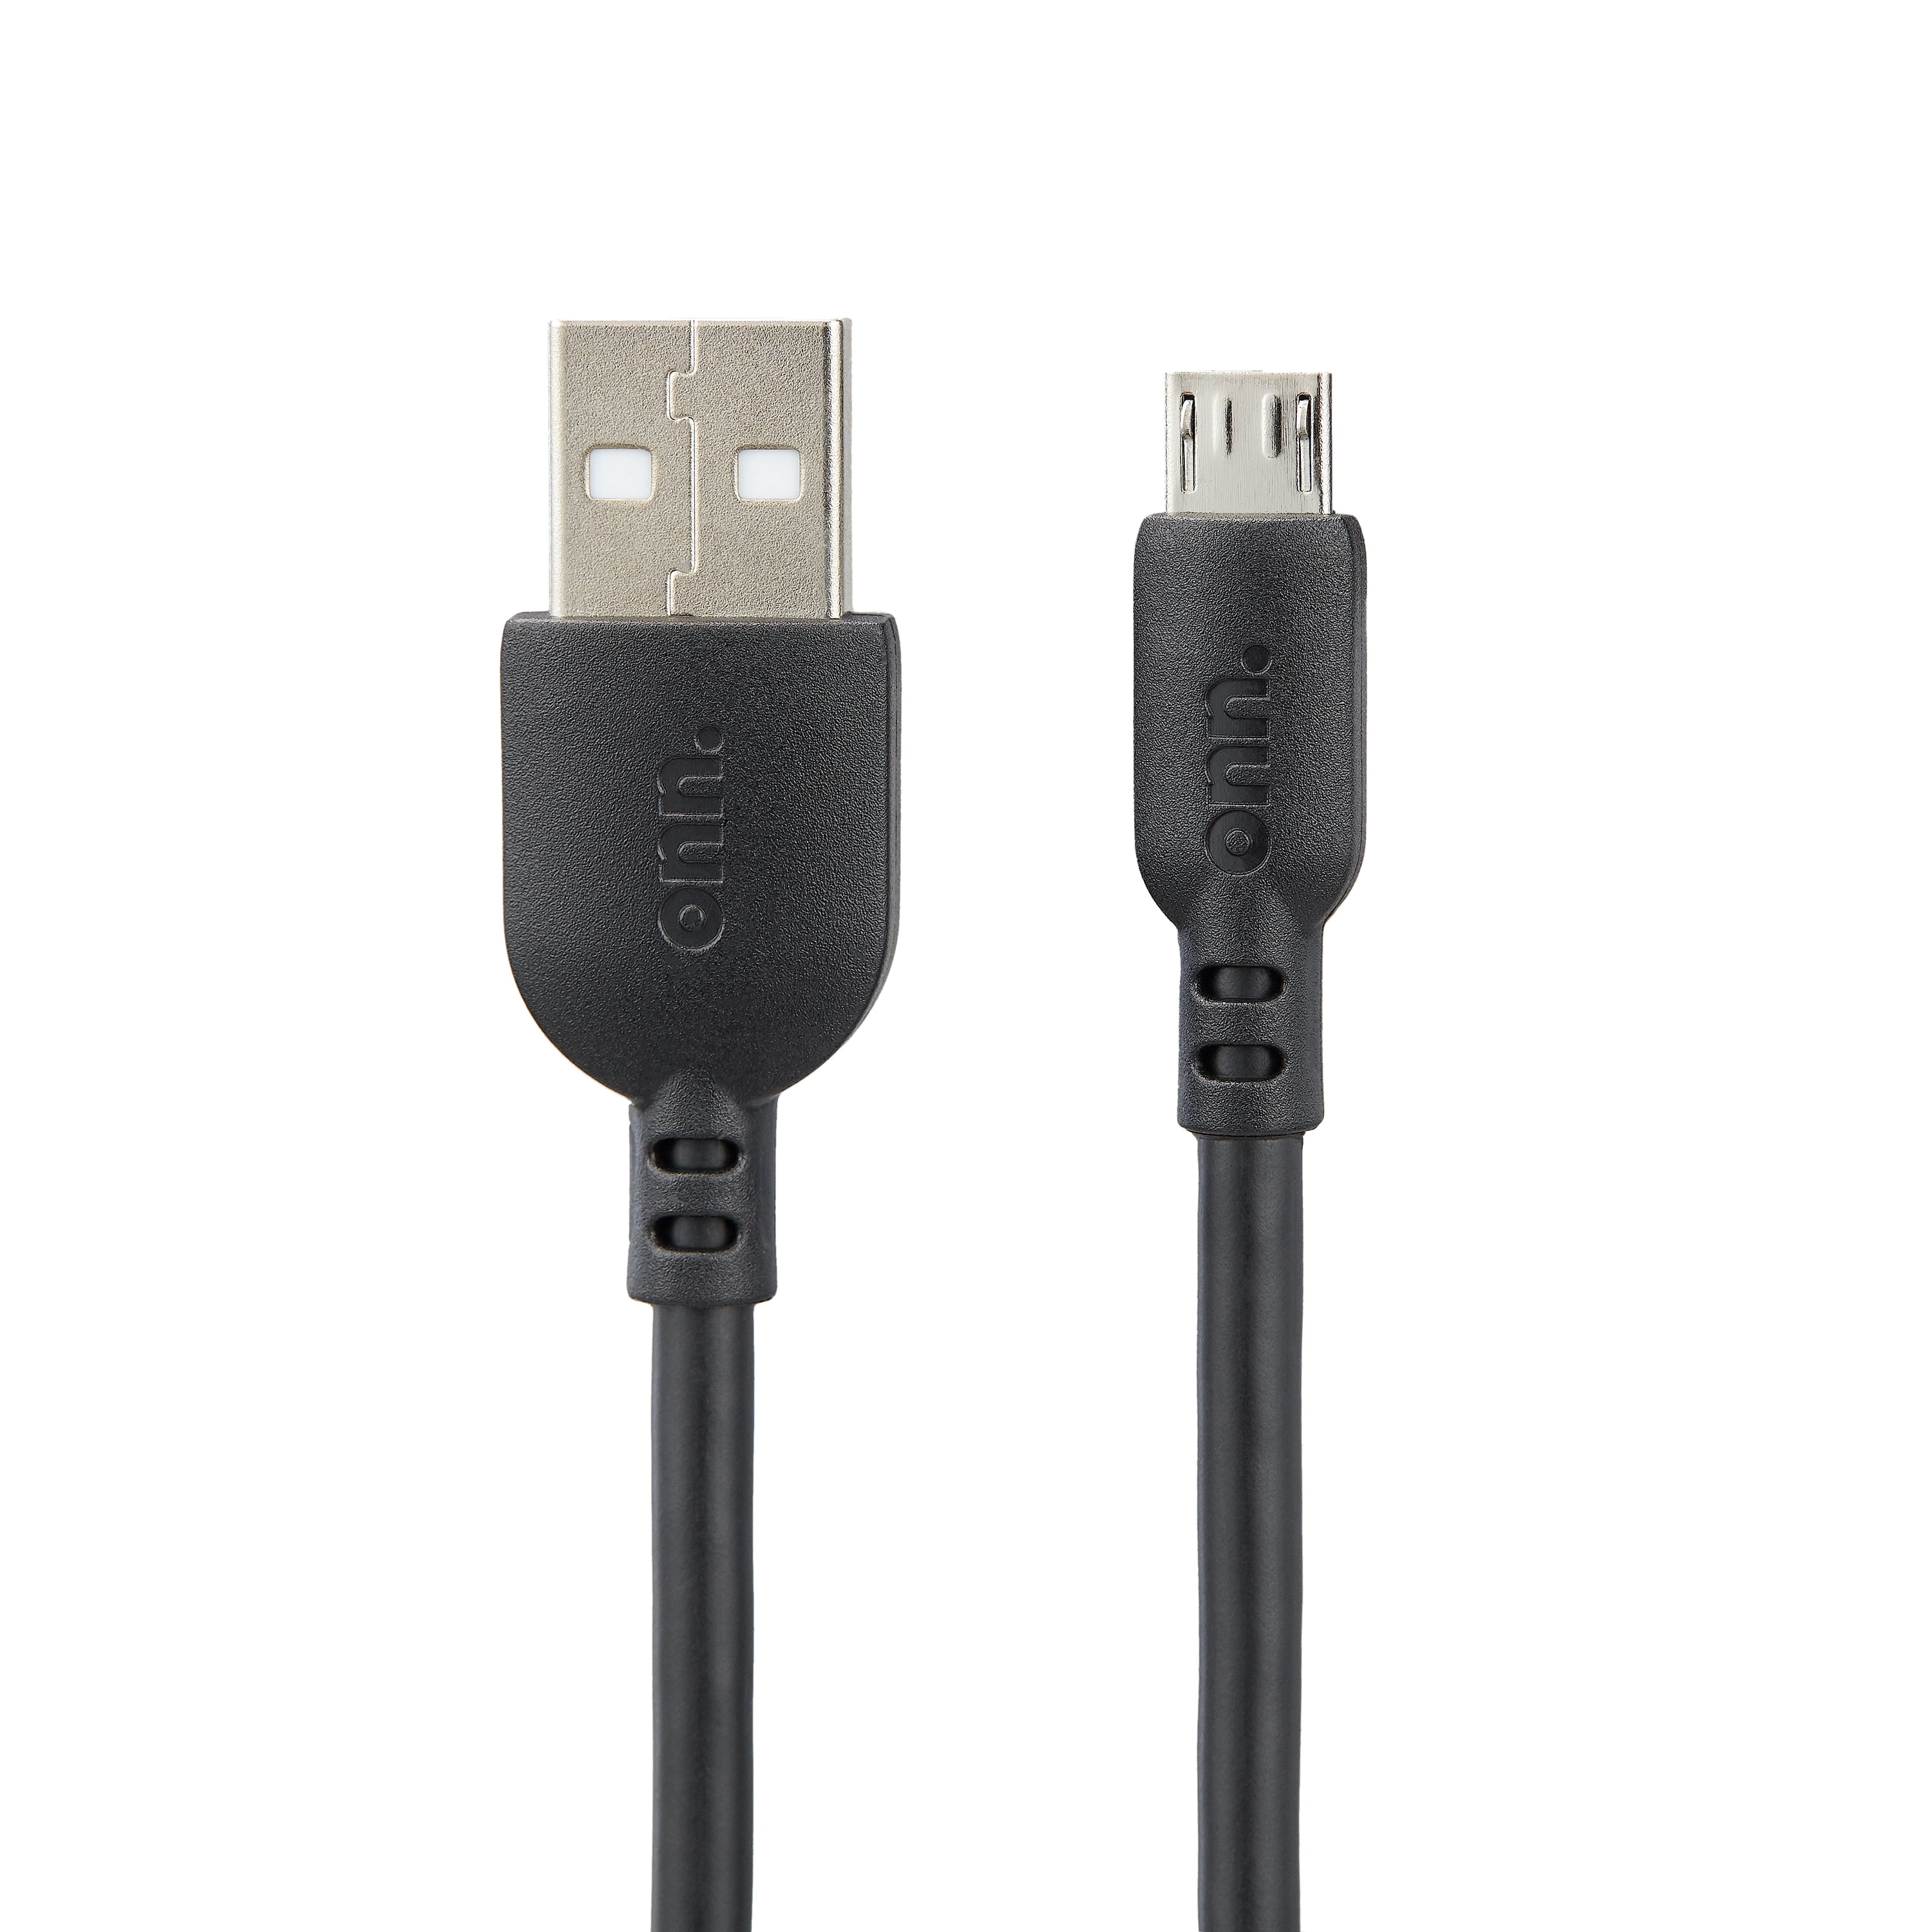 6/10 FT Foot USB charge cable/cord Insignia Wi-Fi Android HD Tablet 7.85 8 10.1"